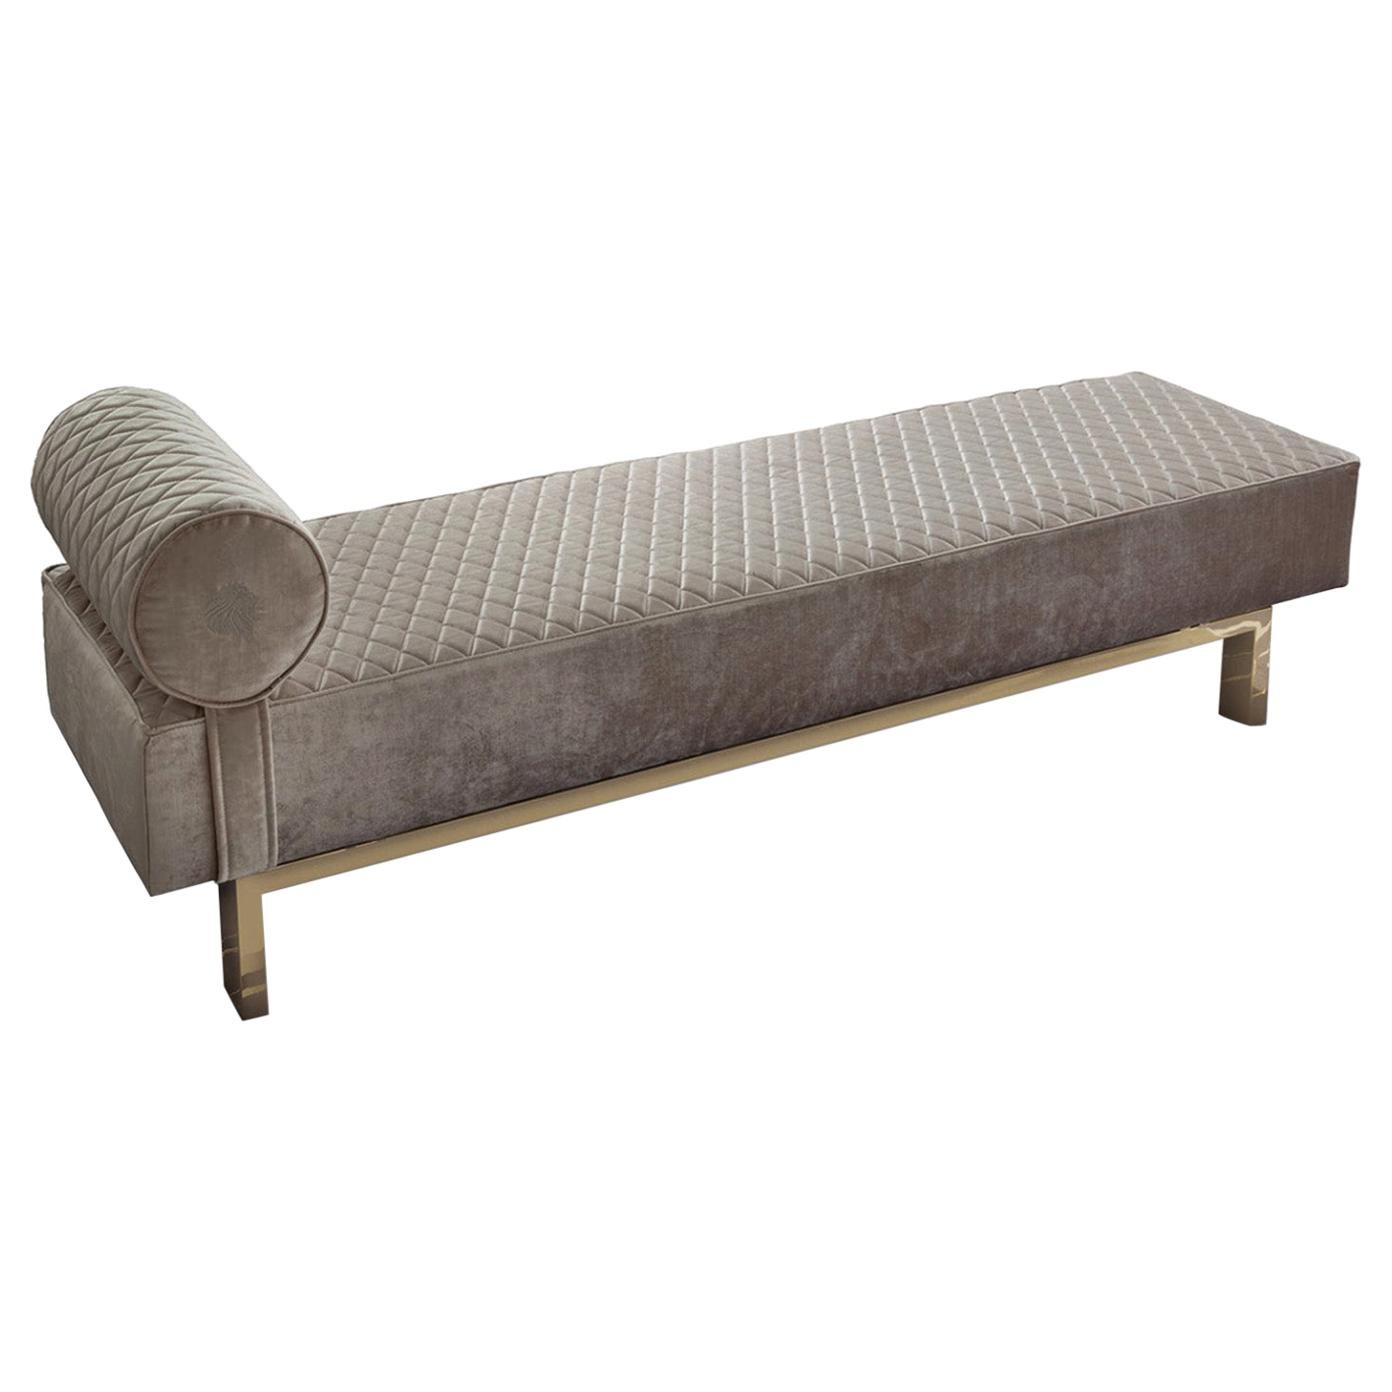 Giorgio Collection Infinity Bench gepolstert mit Gold-Chrom-Akzent